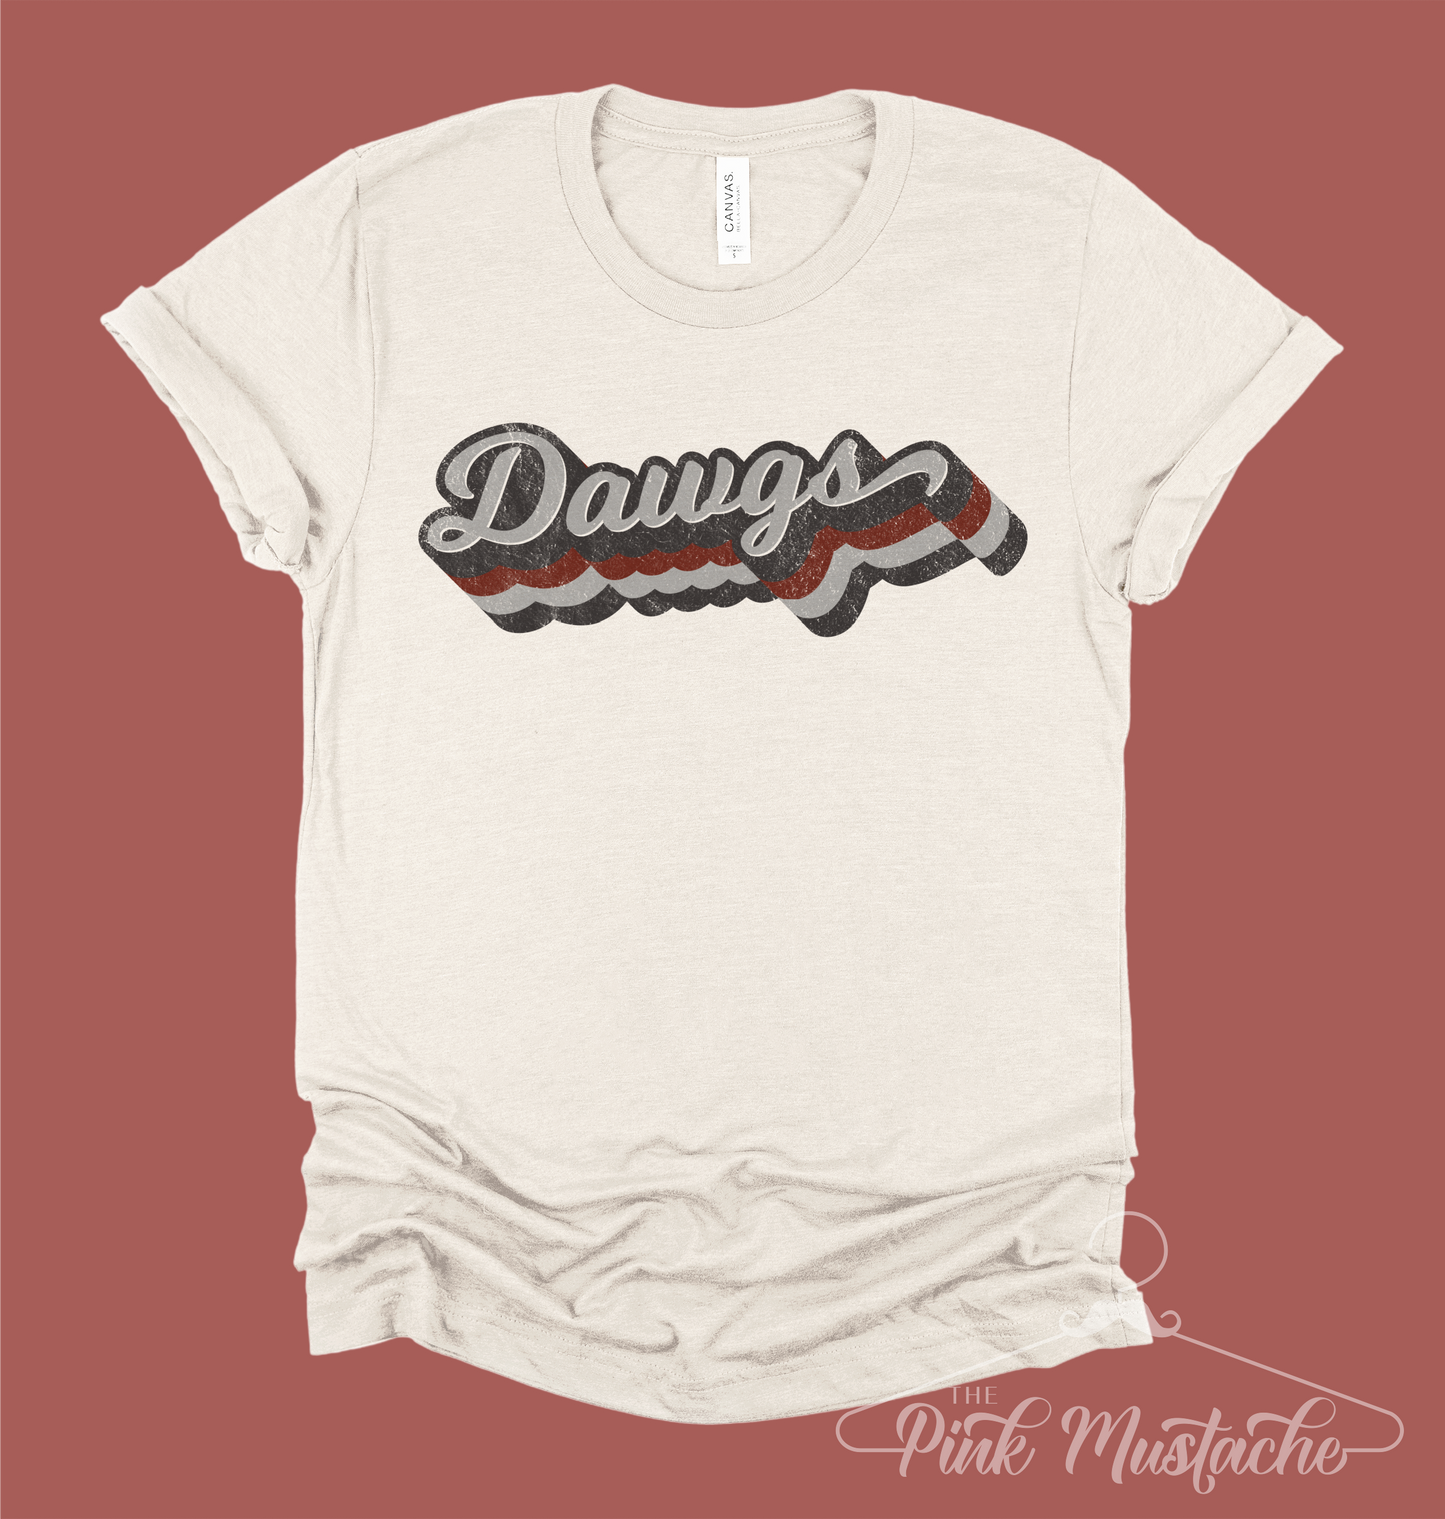 Soft Style Dawgs - Crawford Fundraiser - Tee/ Toddler, Youth, and Adult Sizes Available